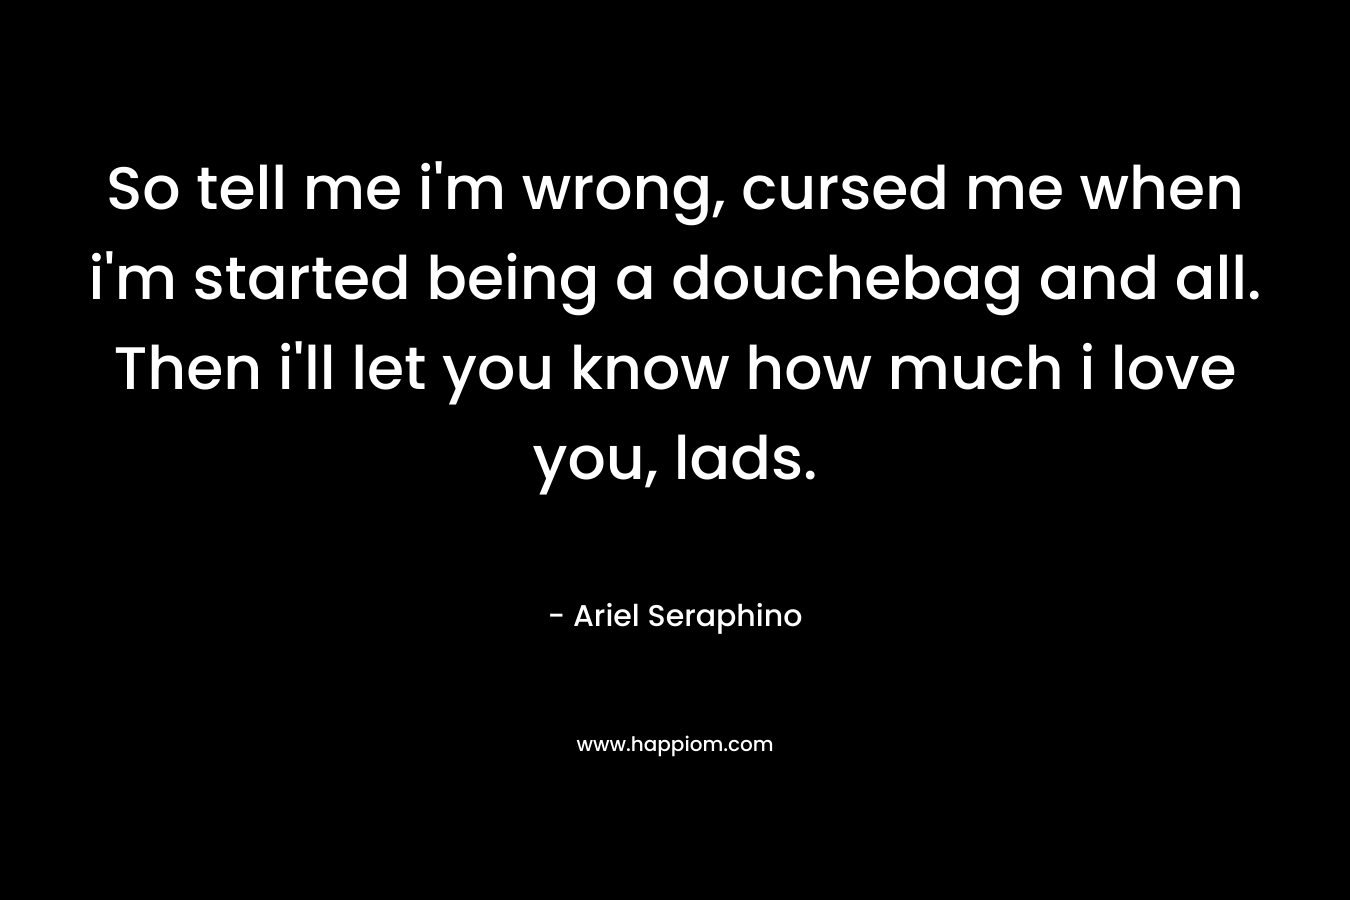 So tell me i’m wrong, cursed me when i’m started being a douchebag and all. Then i’ll let you know how much i love you, lads. – Ariel Seraphino